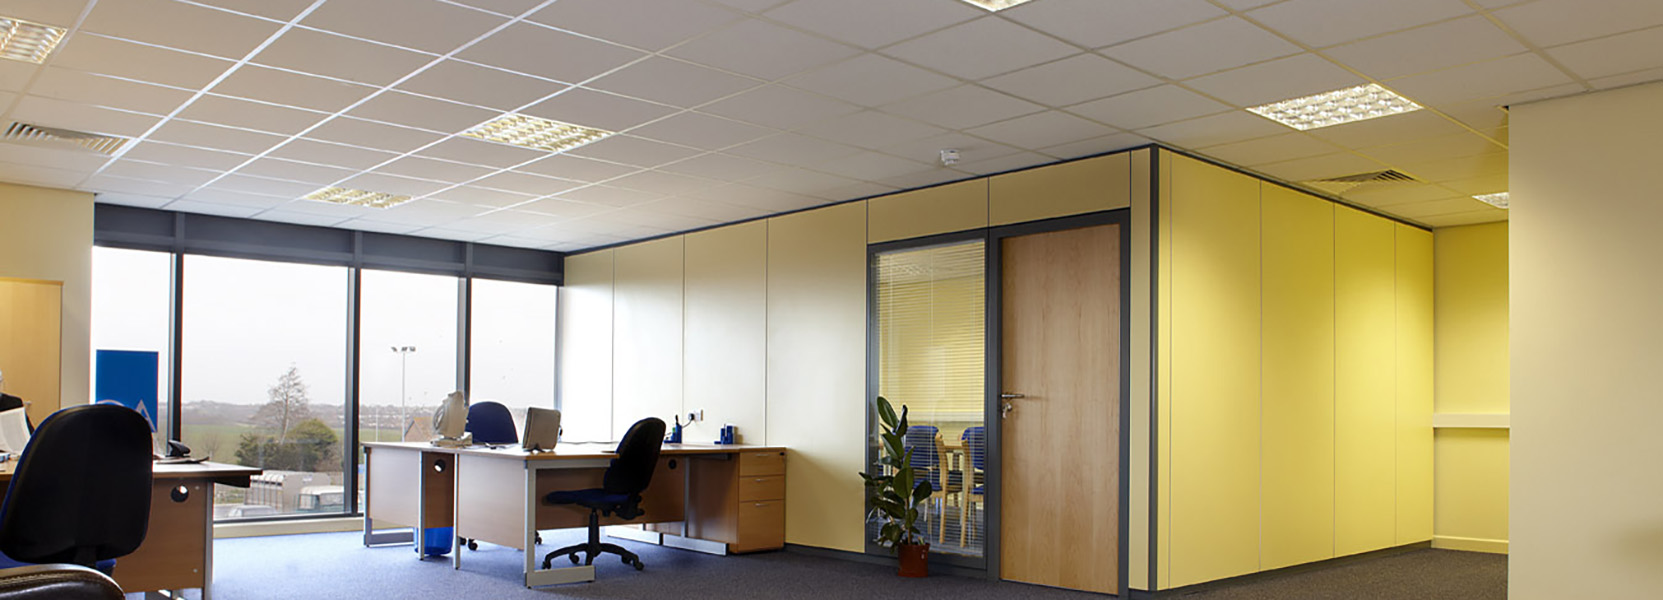 Knauf Ceiling Solutions AMF THERMATEX Plain Application